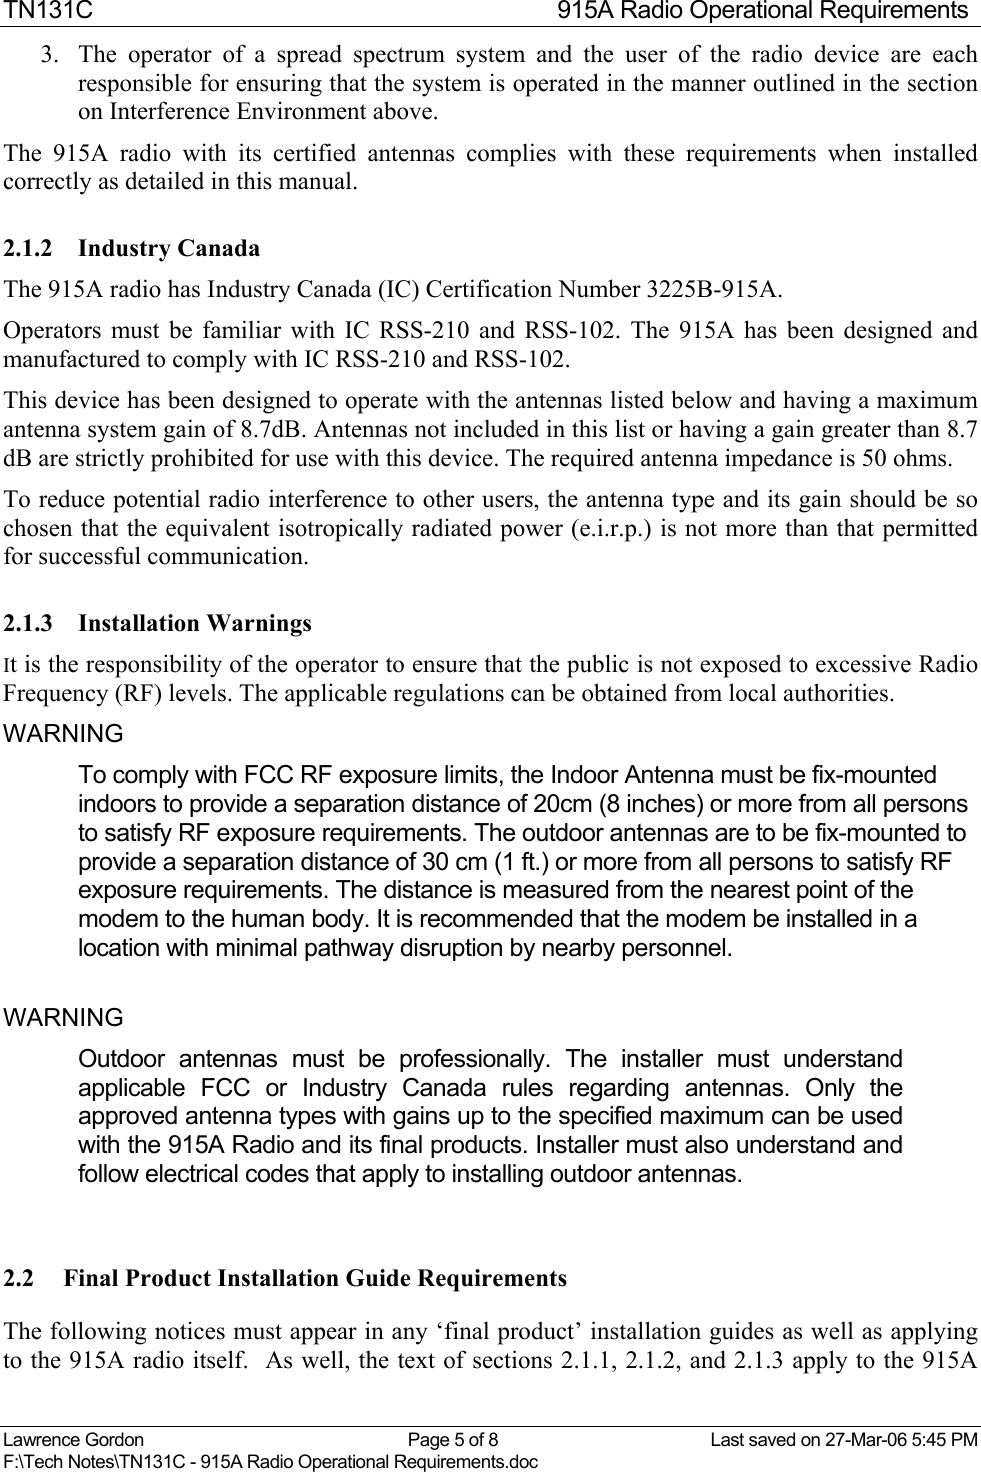 TN131C  915A Radio Operational Requirements Lawrence Gordon  Page 5 of 8  Last saved on 27-Mar-06 5:45 PM F:\Tech Notes\TN131C - 915A Radio Operational Requirements.doc   3.  The operator of a spread spectrum system and the user of the radio device are each responsible for ensuring that the system is operated in the manner outlined in the section on Interference Environment above. The 915A radio with its certified antennas complies with these requirements when installed correctly as detailed in this manual. 2.1.2 Industry Canada The 915A radio has Industry Canada (IC) Certification Number 3225B-915A. Operators must be familiar with IC RSS-210 and RSS-102. The 915A has been designed and manufactured to comply with IC RSS-210 and RSS-102.  This device has been designed to operate with the antennas listed below and having a maximum antenna system gain of 8.7dB. Antennas not included in this list or having a gain greater than 8.7 dB are strictly prohibited for use with this device. The required antenna impedance is 50 ohms. To reduce potential radio interference to other users, the antenna type and its gain should be so chosen that the equivalent isotropically radiated power (e.i.r.p.) is not more than that permitted for successful communication. 2.1.3 Installation Warnings It is the responsibility of the operator to ensure that the public is not exposed to excessive Radio Frequency (RF) levels. The applicable regulations can be obtained from local authorities.  WARNING  To comply with FCC RF exposure limits, the Indoor Antenna must be fix-mounted indoors to provide a separation distance of 20cm (8 inches) or more from all persons to satisfy RF exposure requirements. The outdoor antennas are to be fix-mounted to provide a separation distance of 30 cm (1 ft.) or more from all persons to satisfy RF exposure requirements. The distance is measured from the nearest point of the modem to the human body. It is recommended that the modem be installed in a location with minimal pathway disruption by nearby personnel.  WARNING  Outdoor antennas must be professionally. The installer must understand applicable FCC or Industry Canada rules regarding antennas. Only the approved antenna types with gains up to the specified maximum can be used with the 915A Radio and its final products. Installer must also understand and follow electrical codes that apply to installing outdoor antennas. 2.2  Final Product Installation Guide Requirements The following notices must appear in any ‘final product’ installation guides as well as applying to the 915A radio itself.  As well, the text of sections 2.1.1, 2.1.2, and 2.1.3 apply to the 915A 